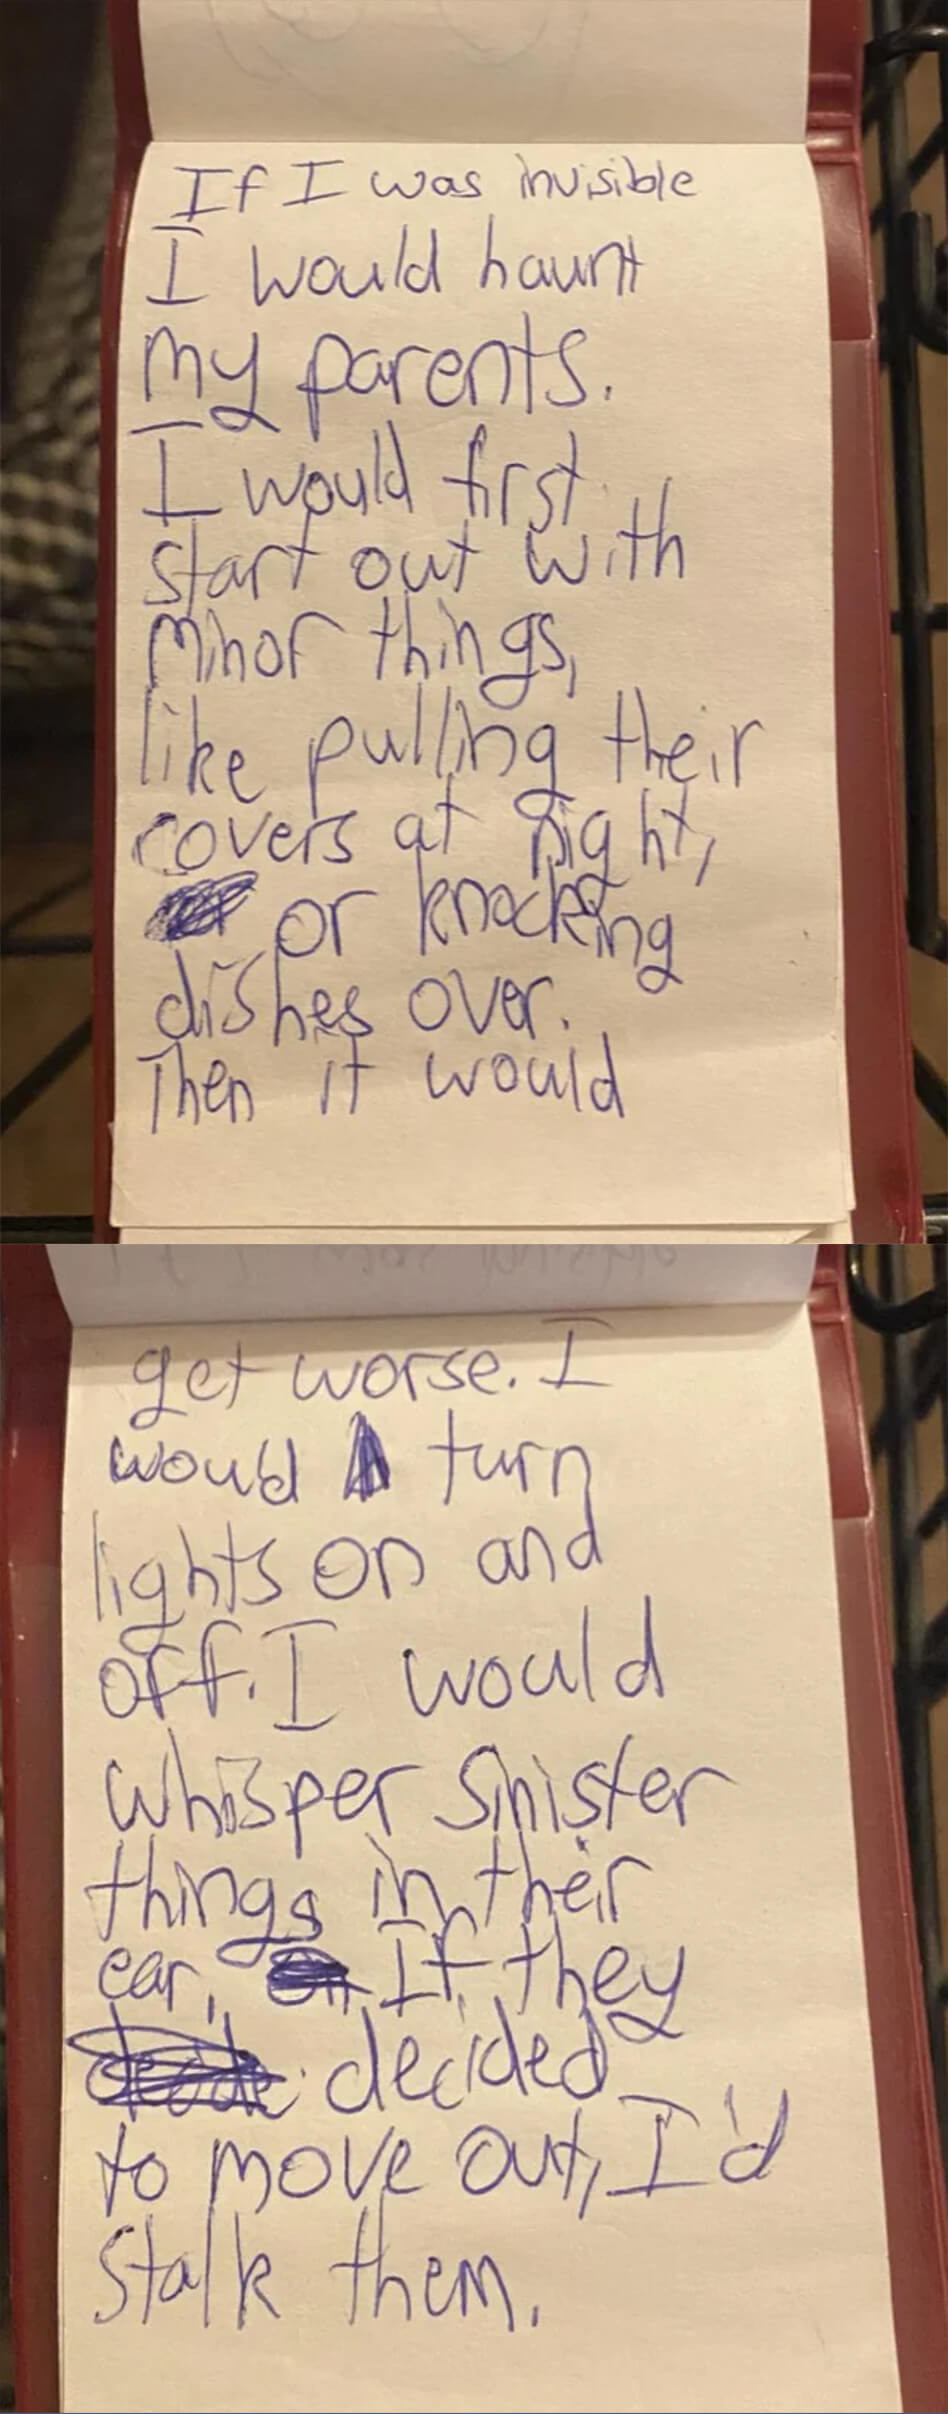 A creepy note from a child